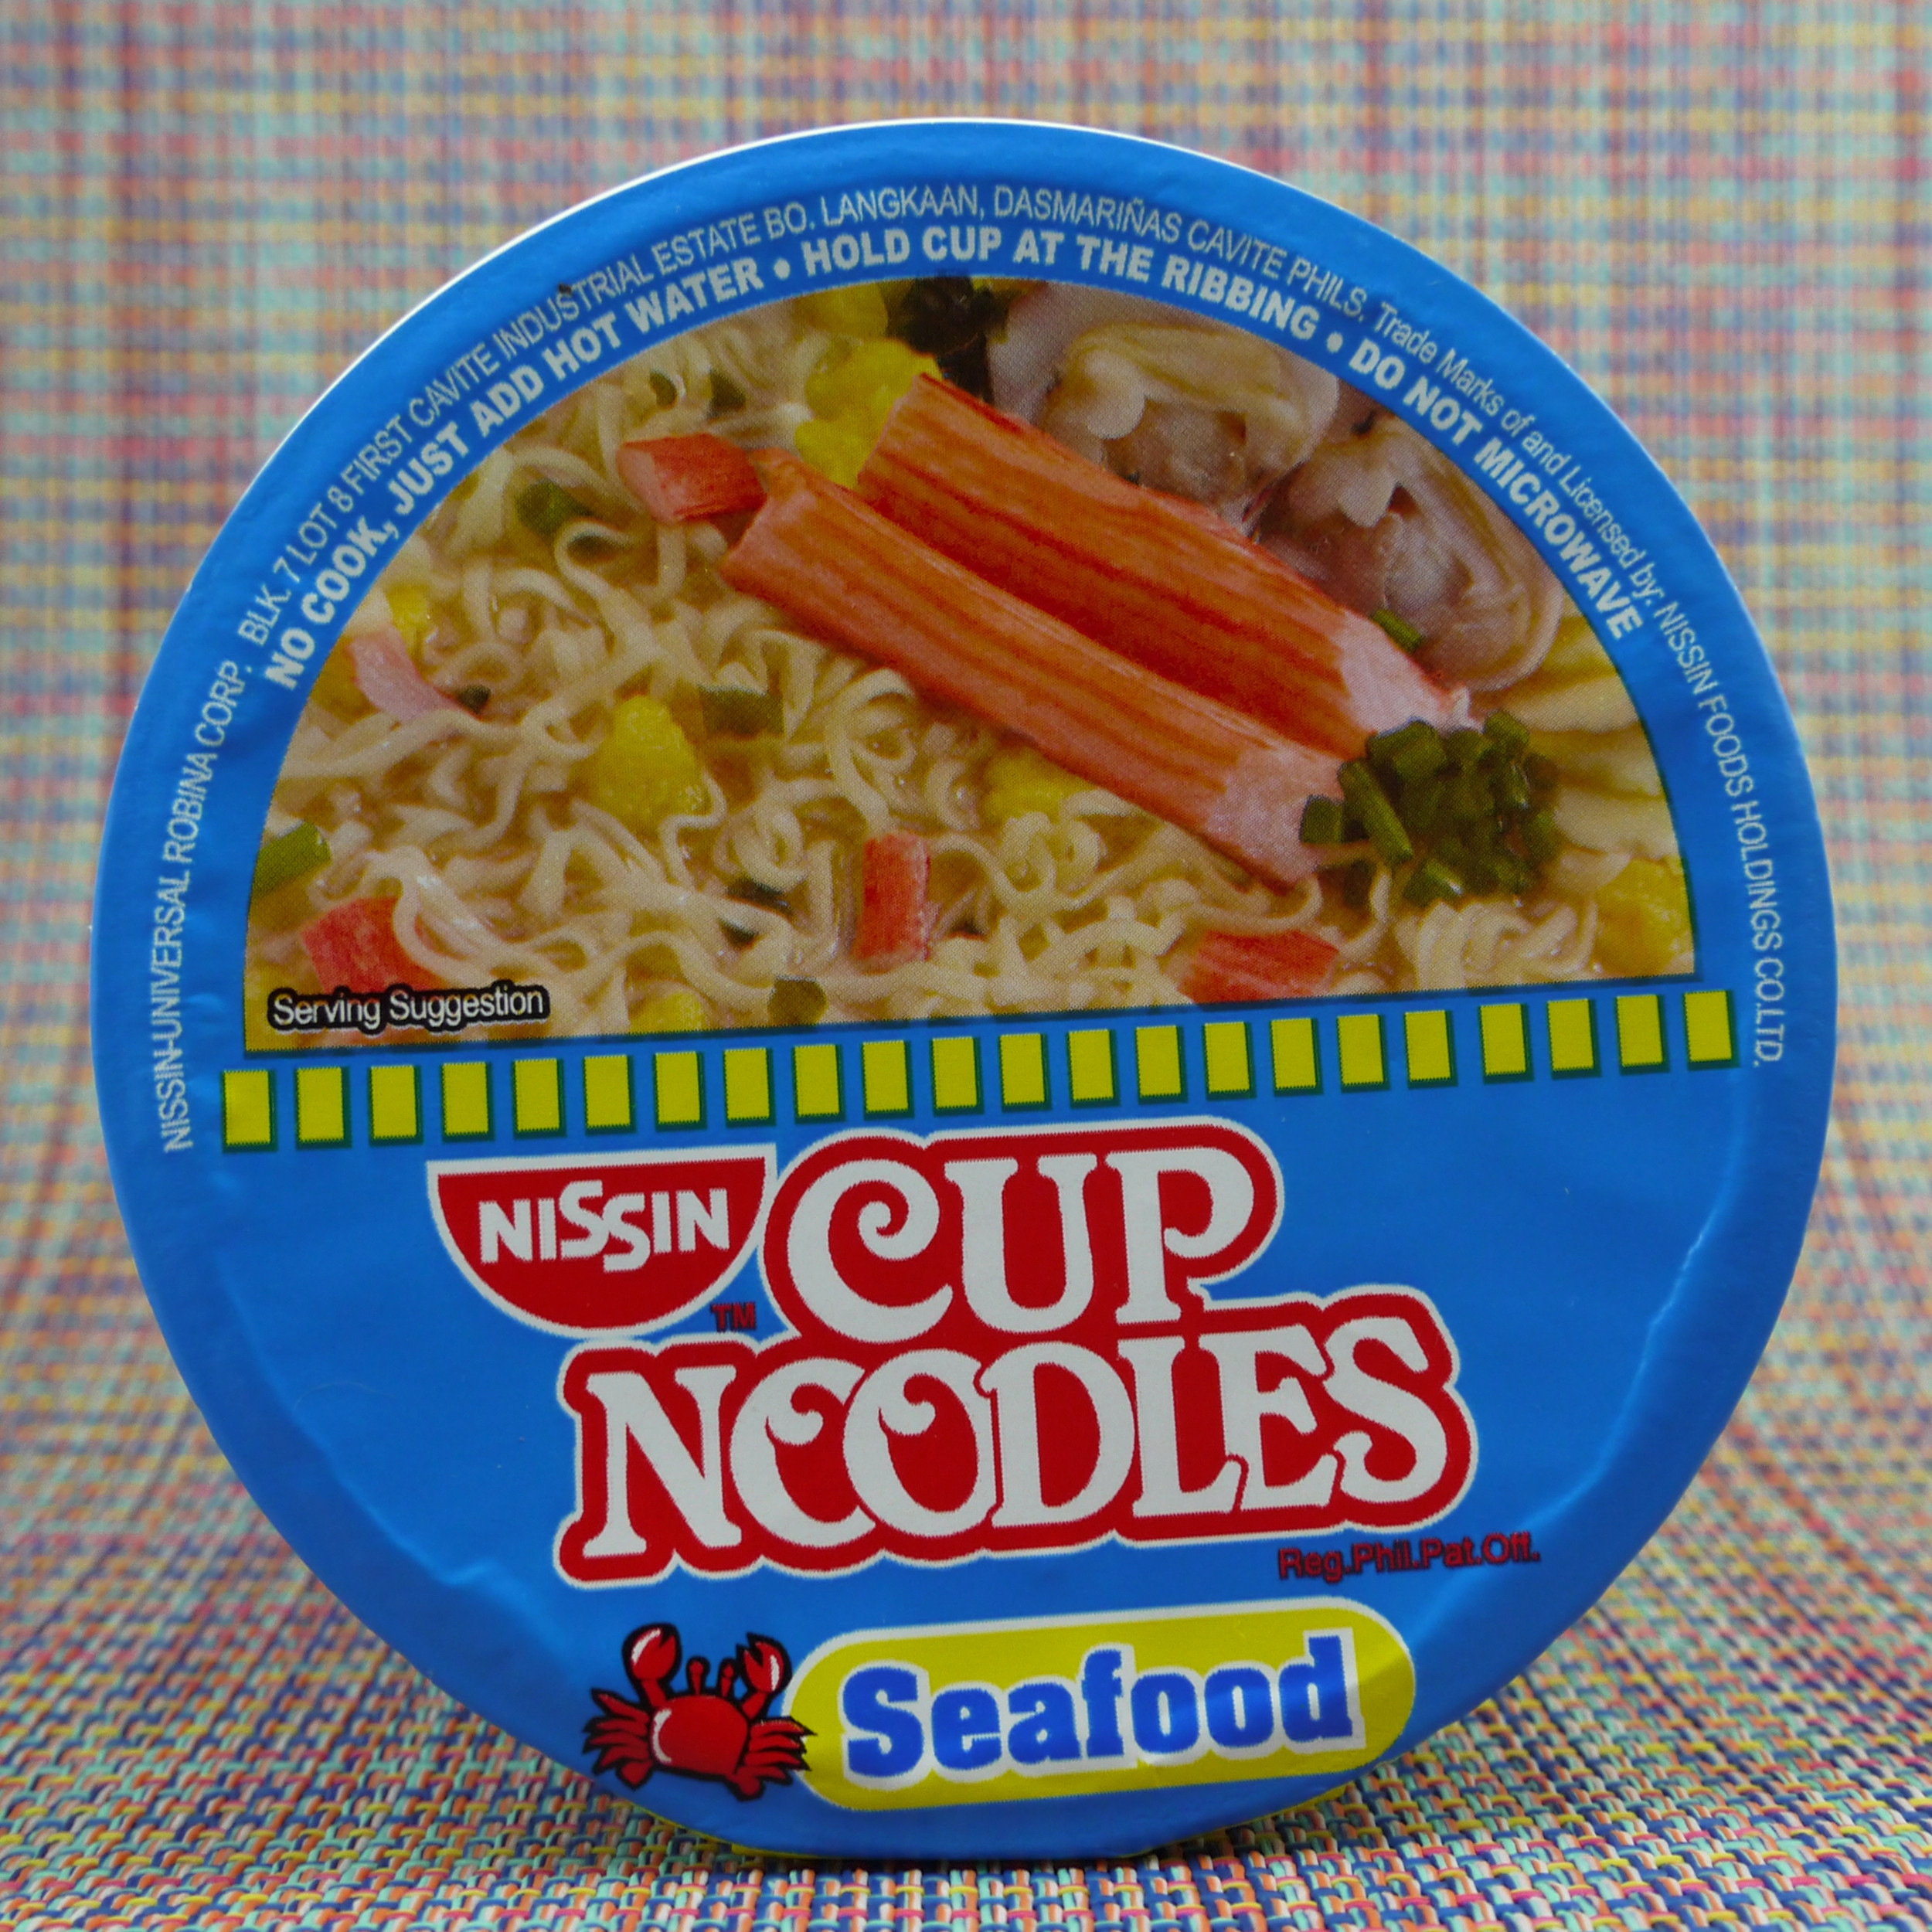 Microwave Cup Of Noodles
 can you microwave nissin cup noodles